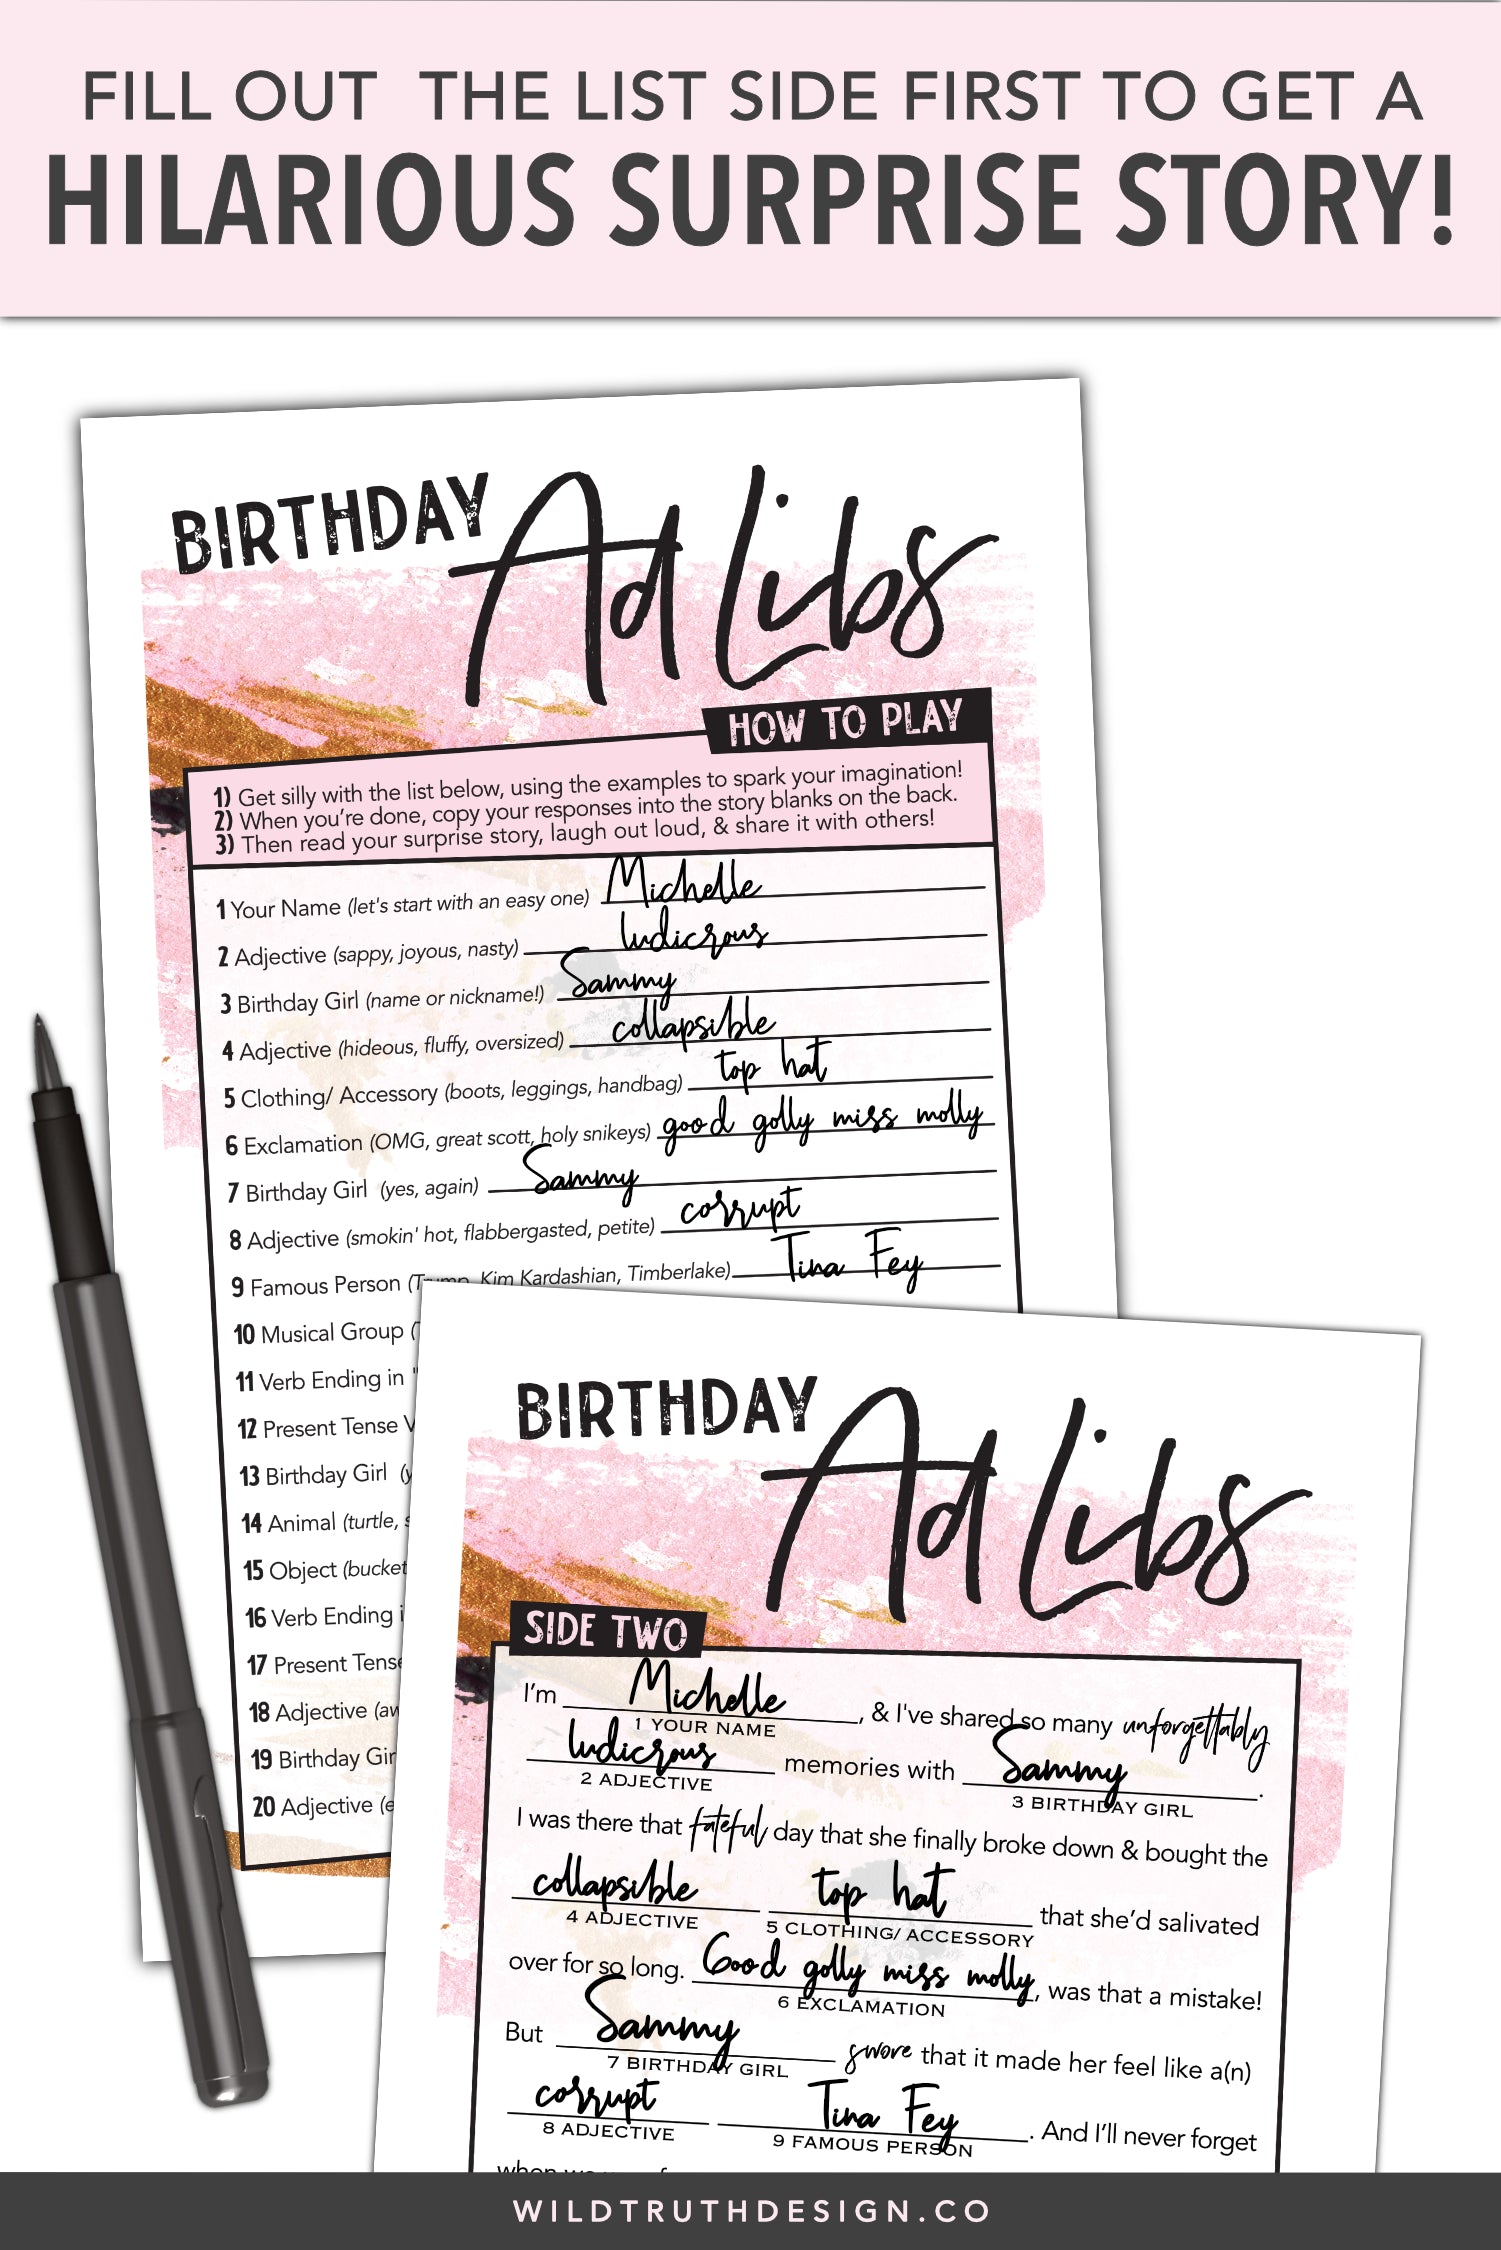 Awesome Birthday Party Games For Women - Mad Libs